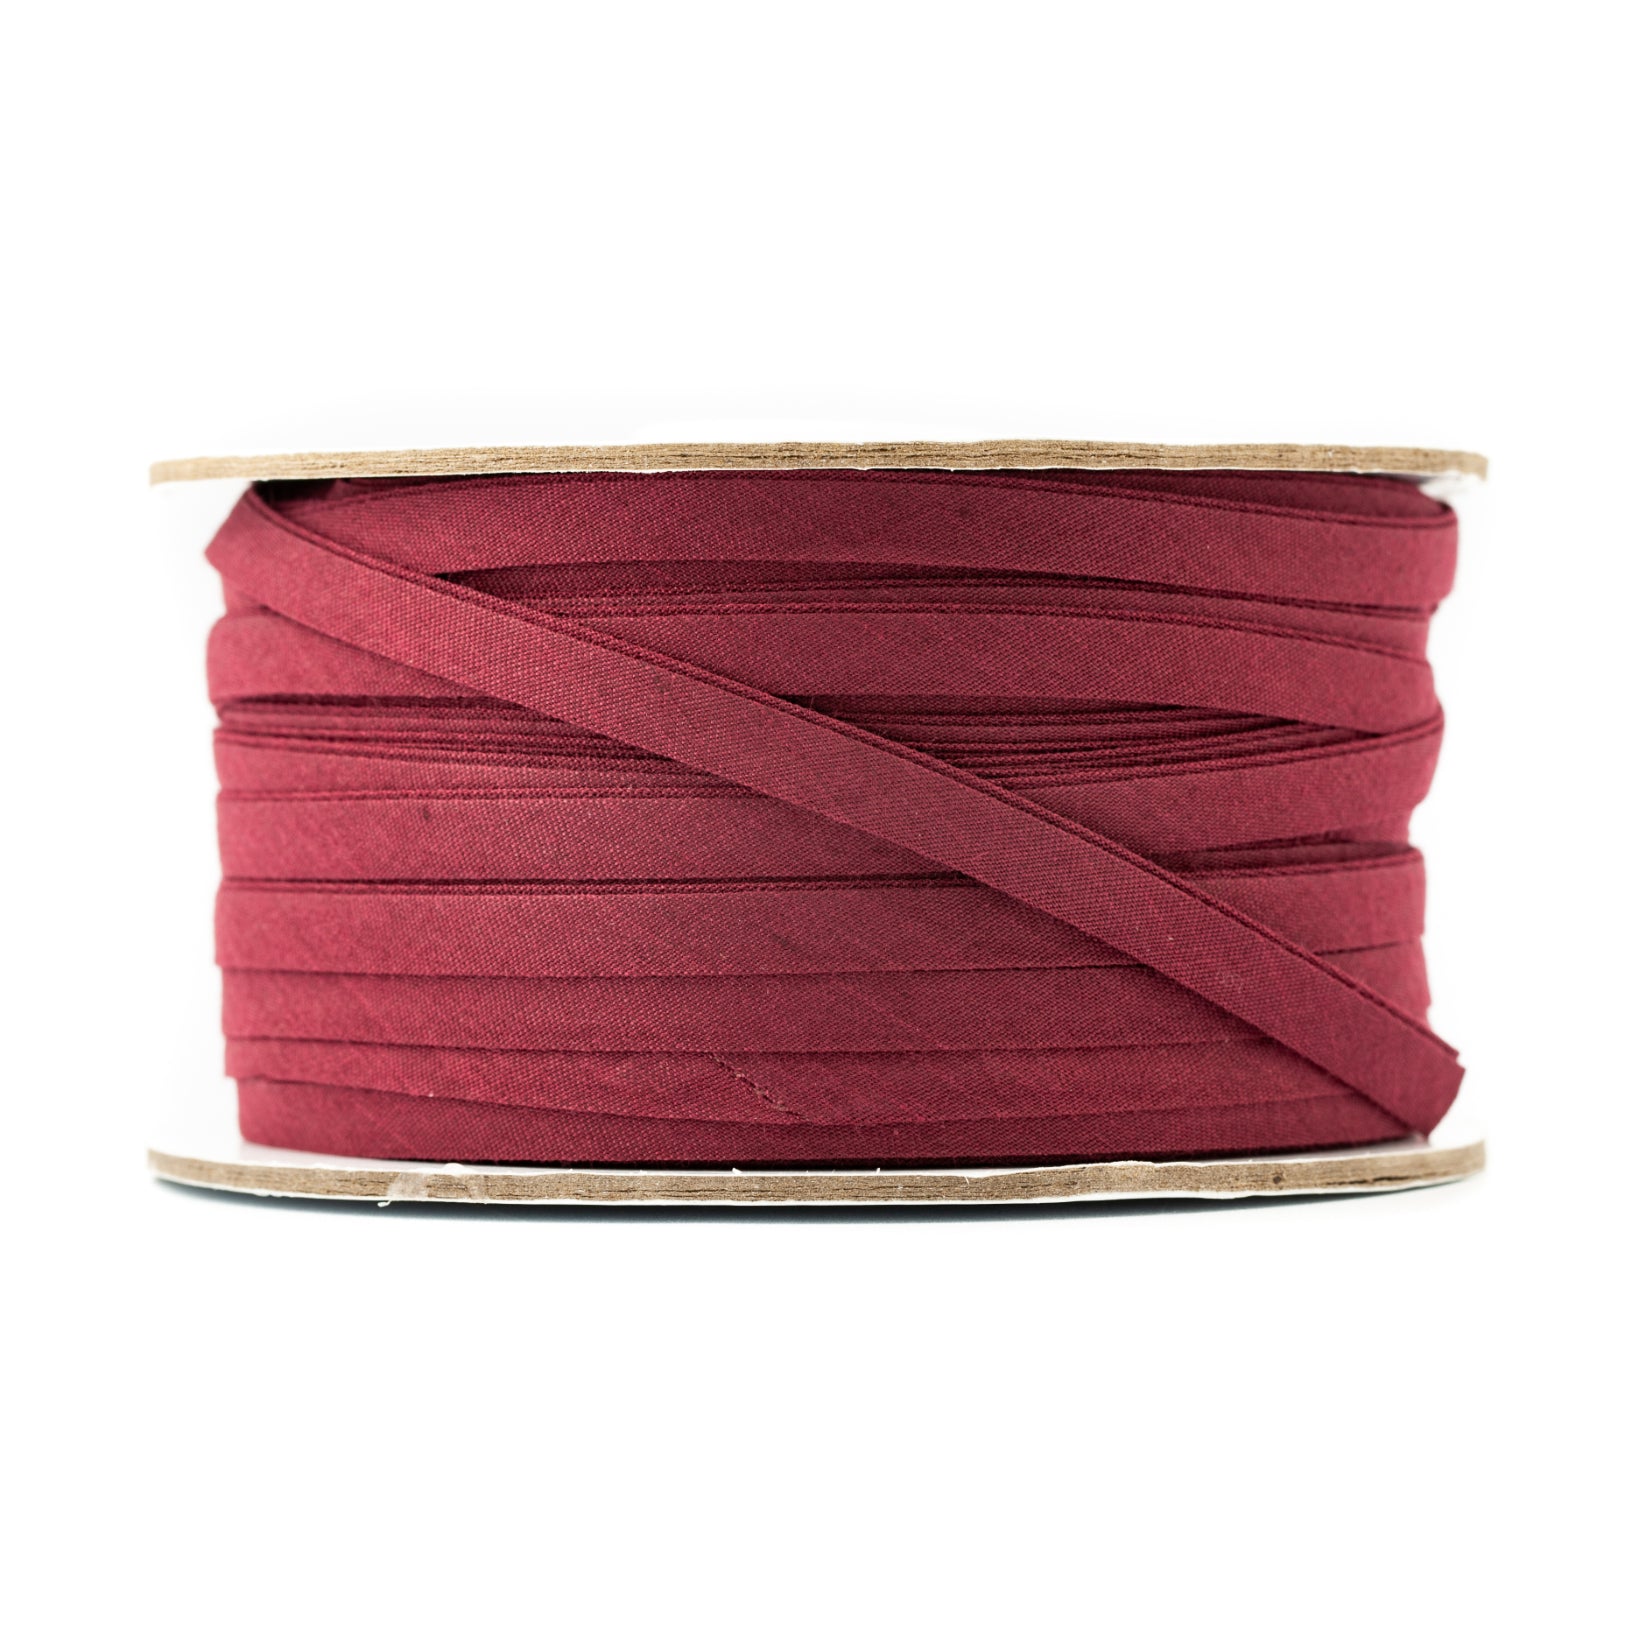 Bias Tape - Wineberry - 7mm (side)